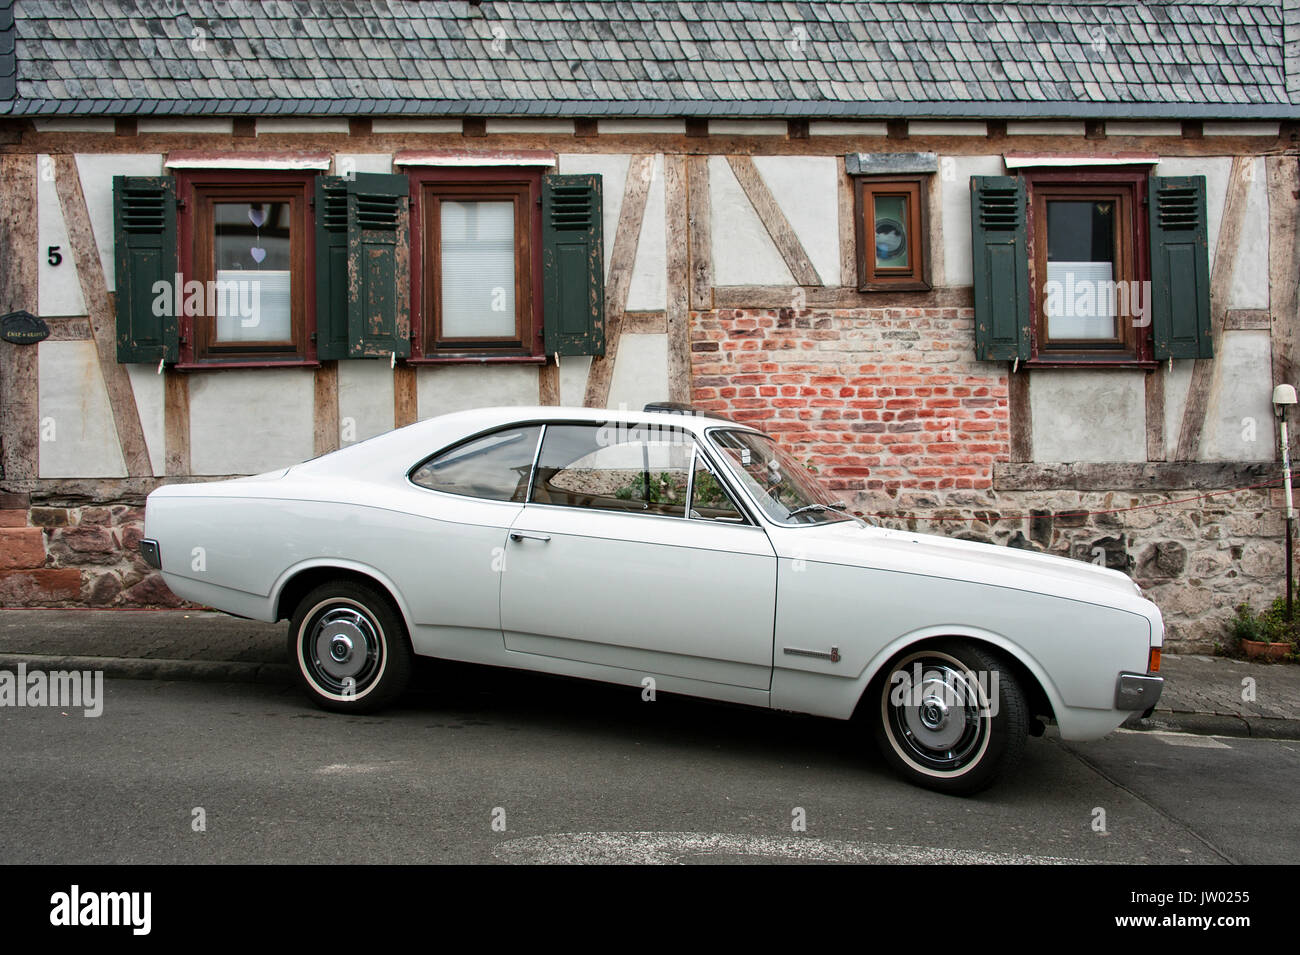 Vintage Car Festival 'Golden Oldies', Opel Rekord Coupe in front of a half-timbered house. Stock Photo